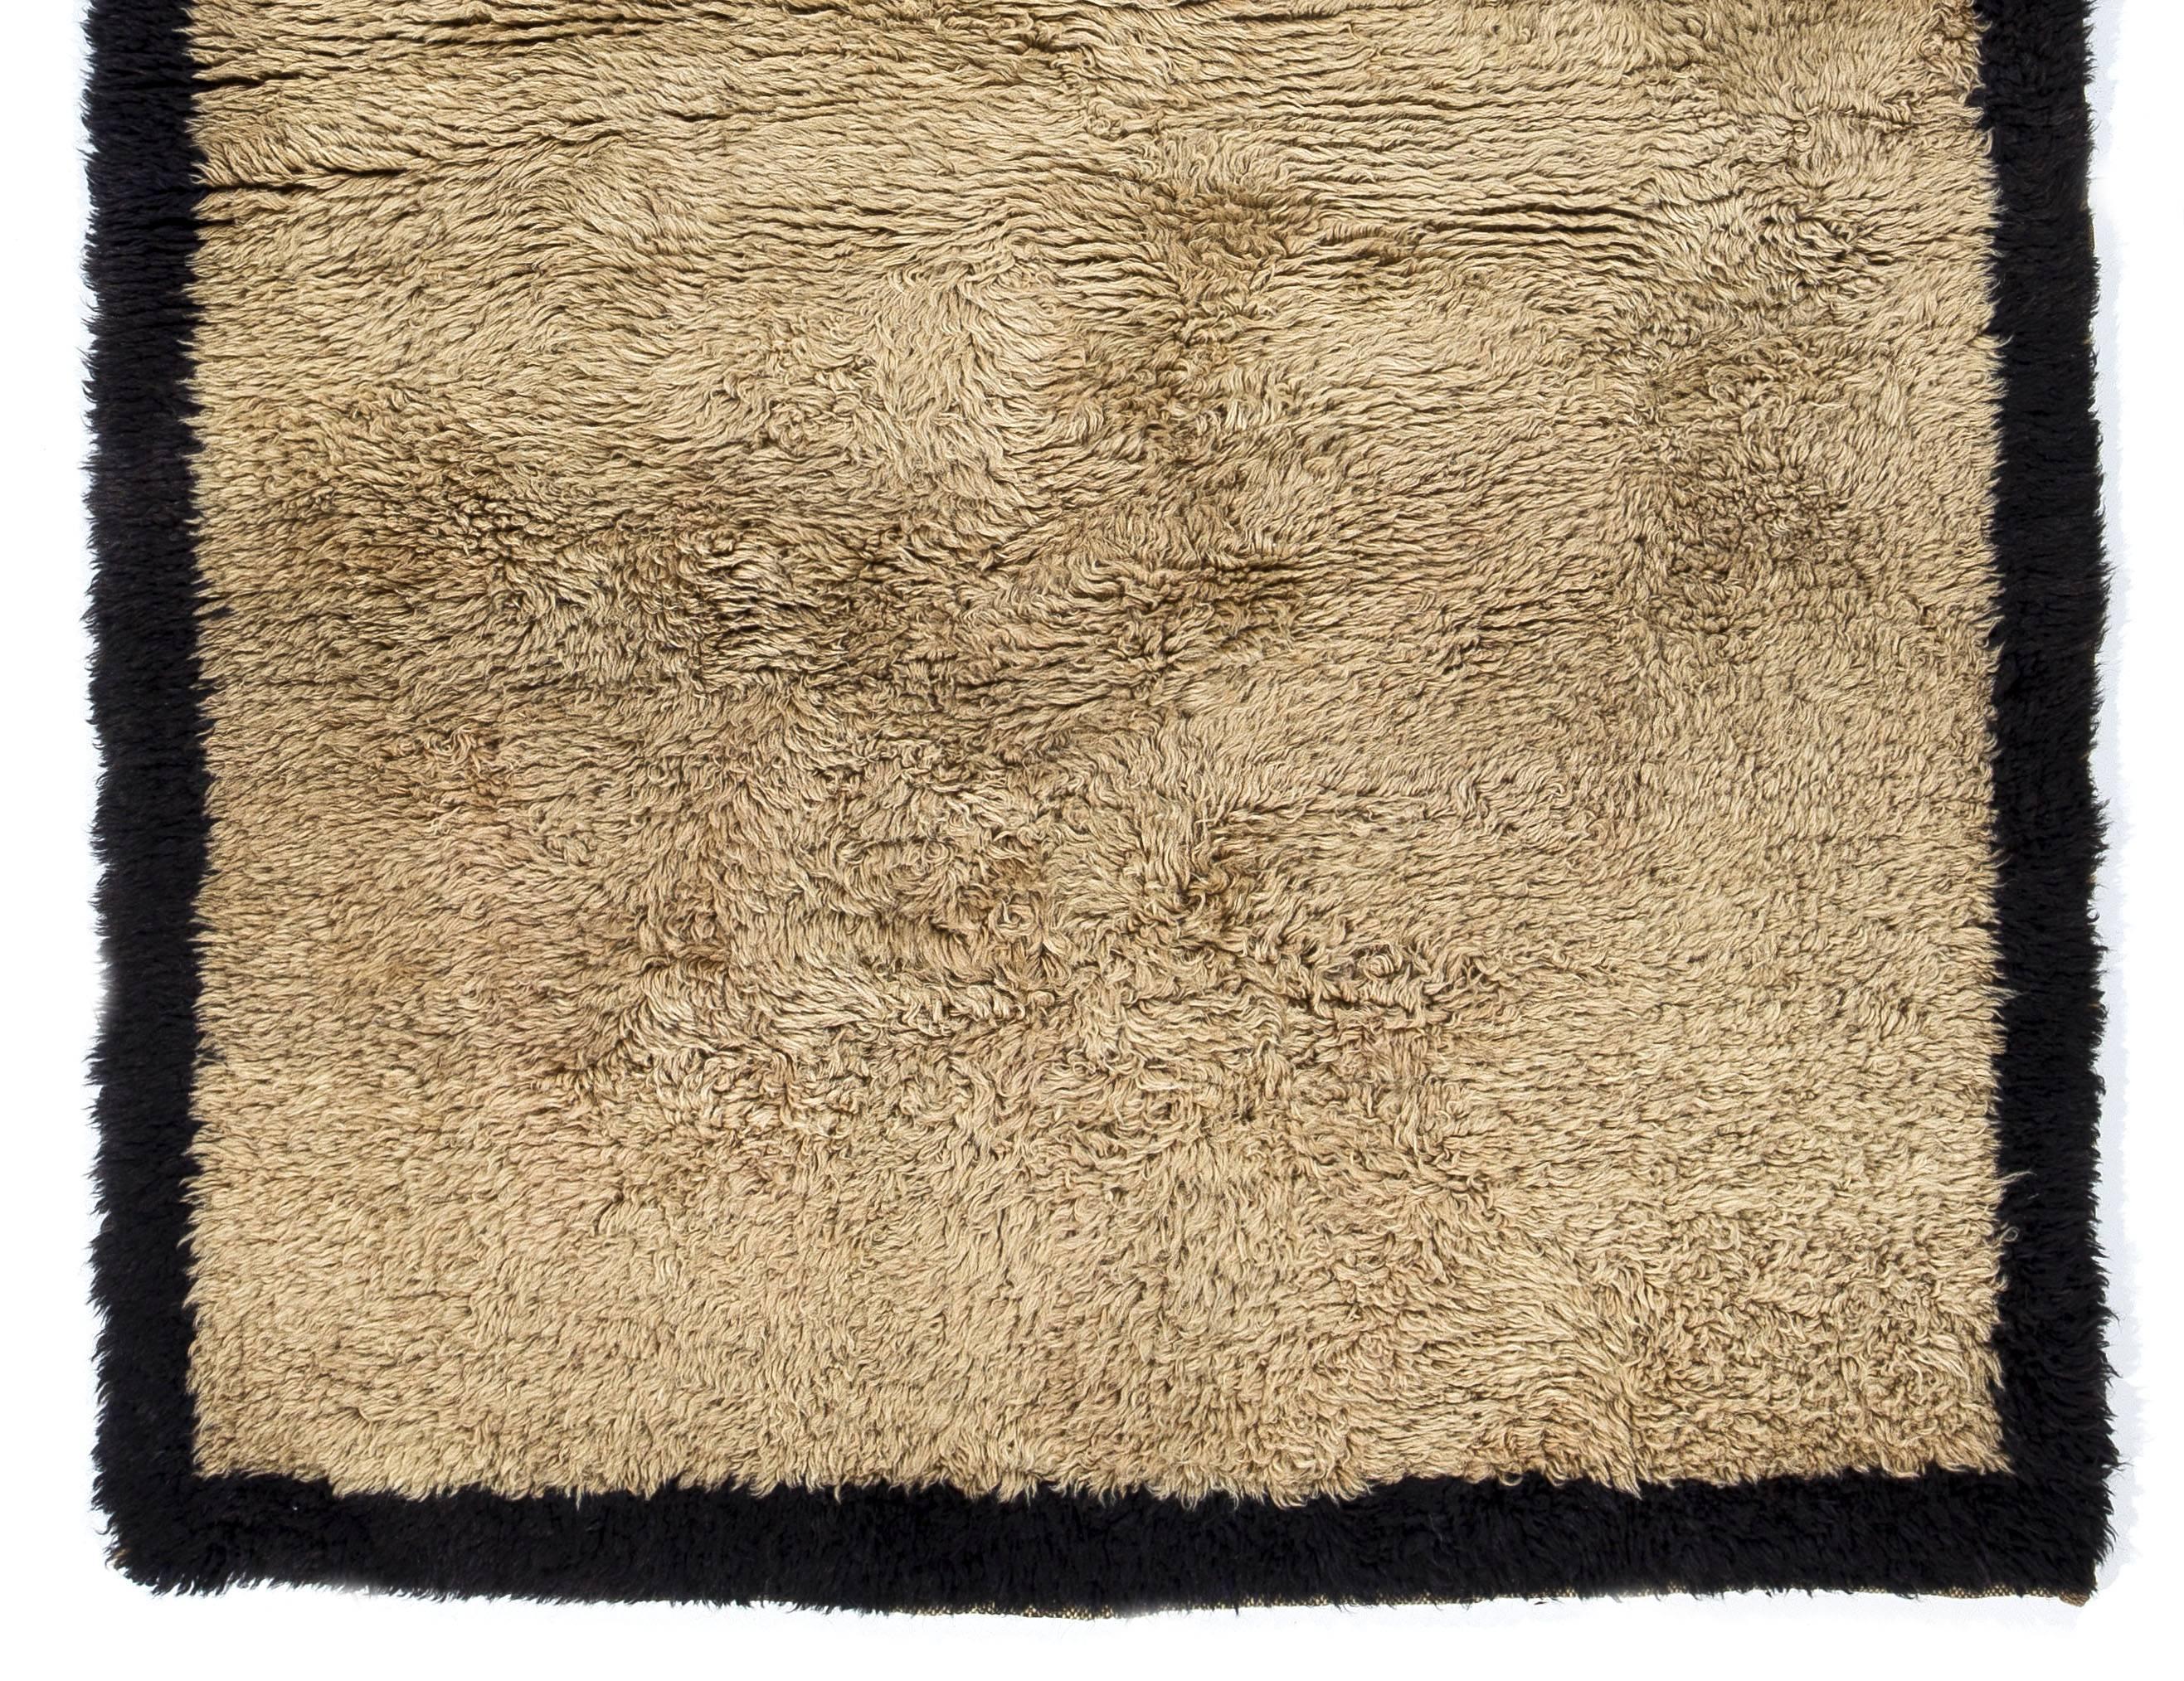 Hand-Knotted Minimalist Anatolian Tulu Rug Made of Natural Beige and Black Wool